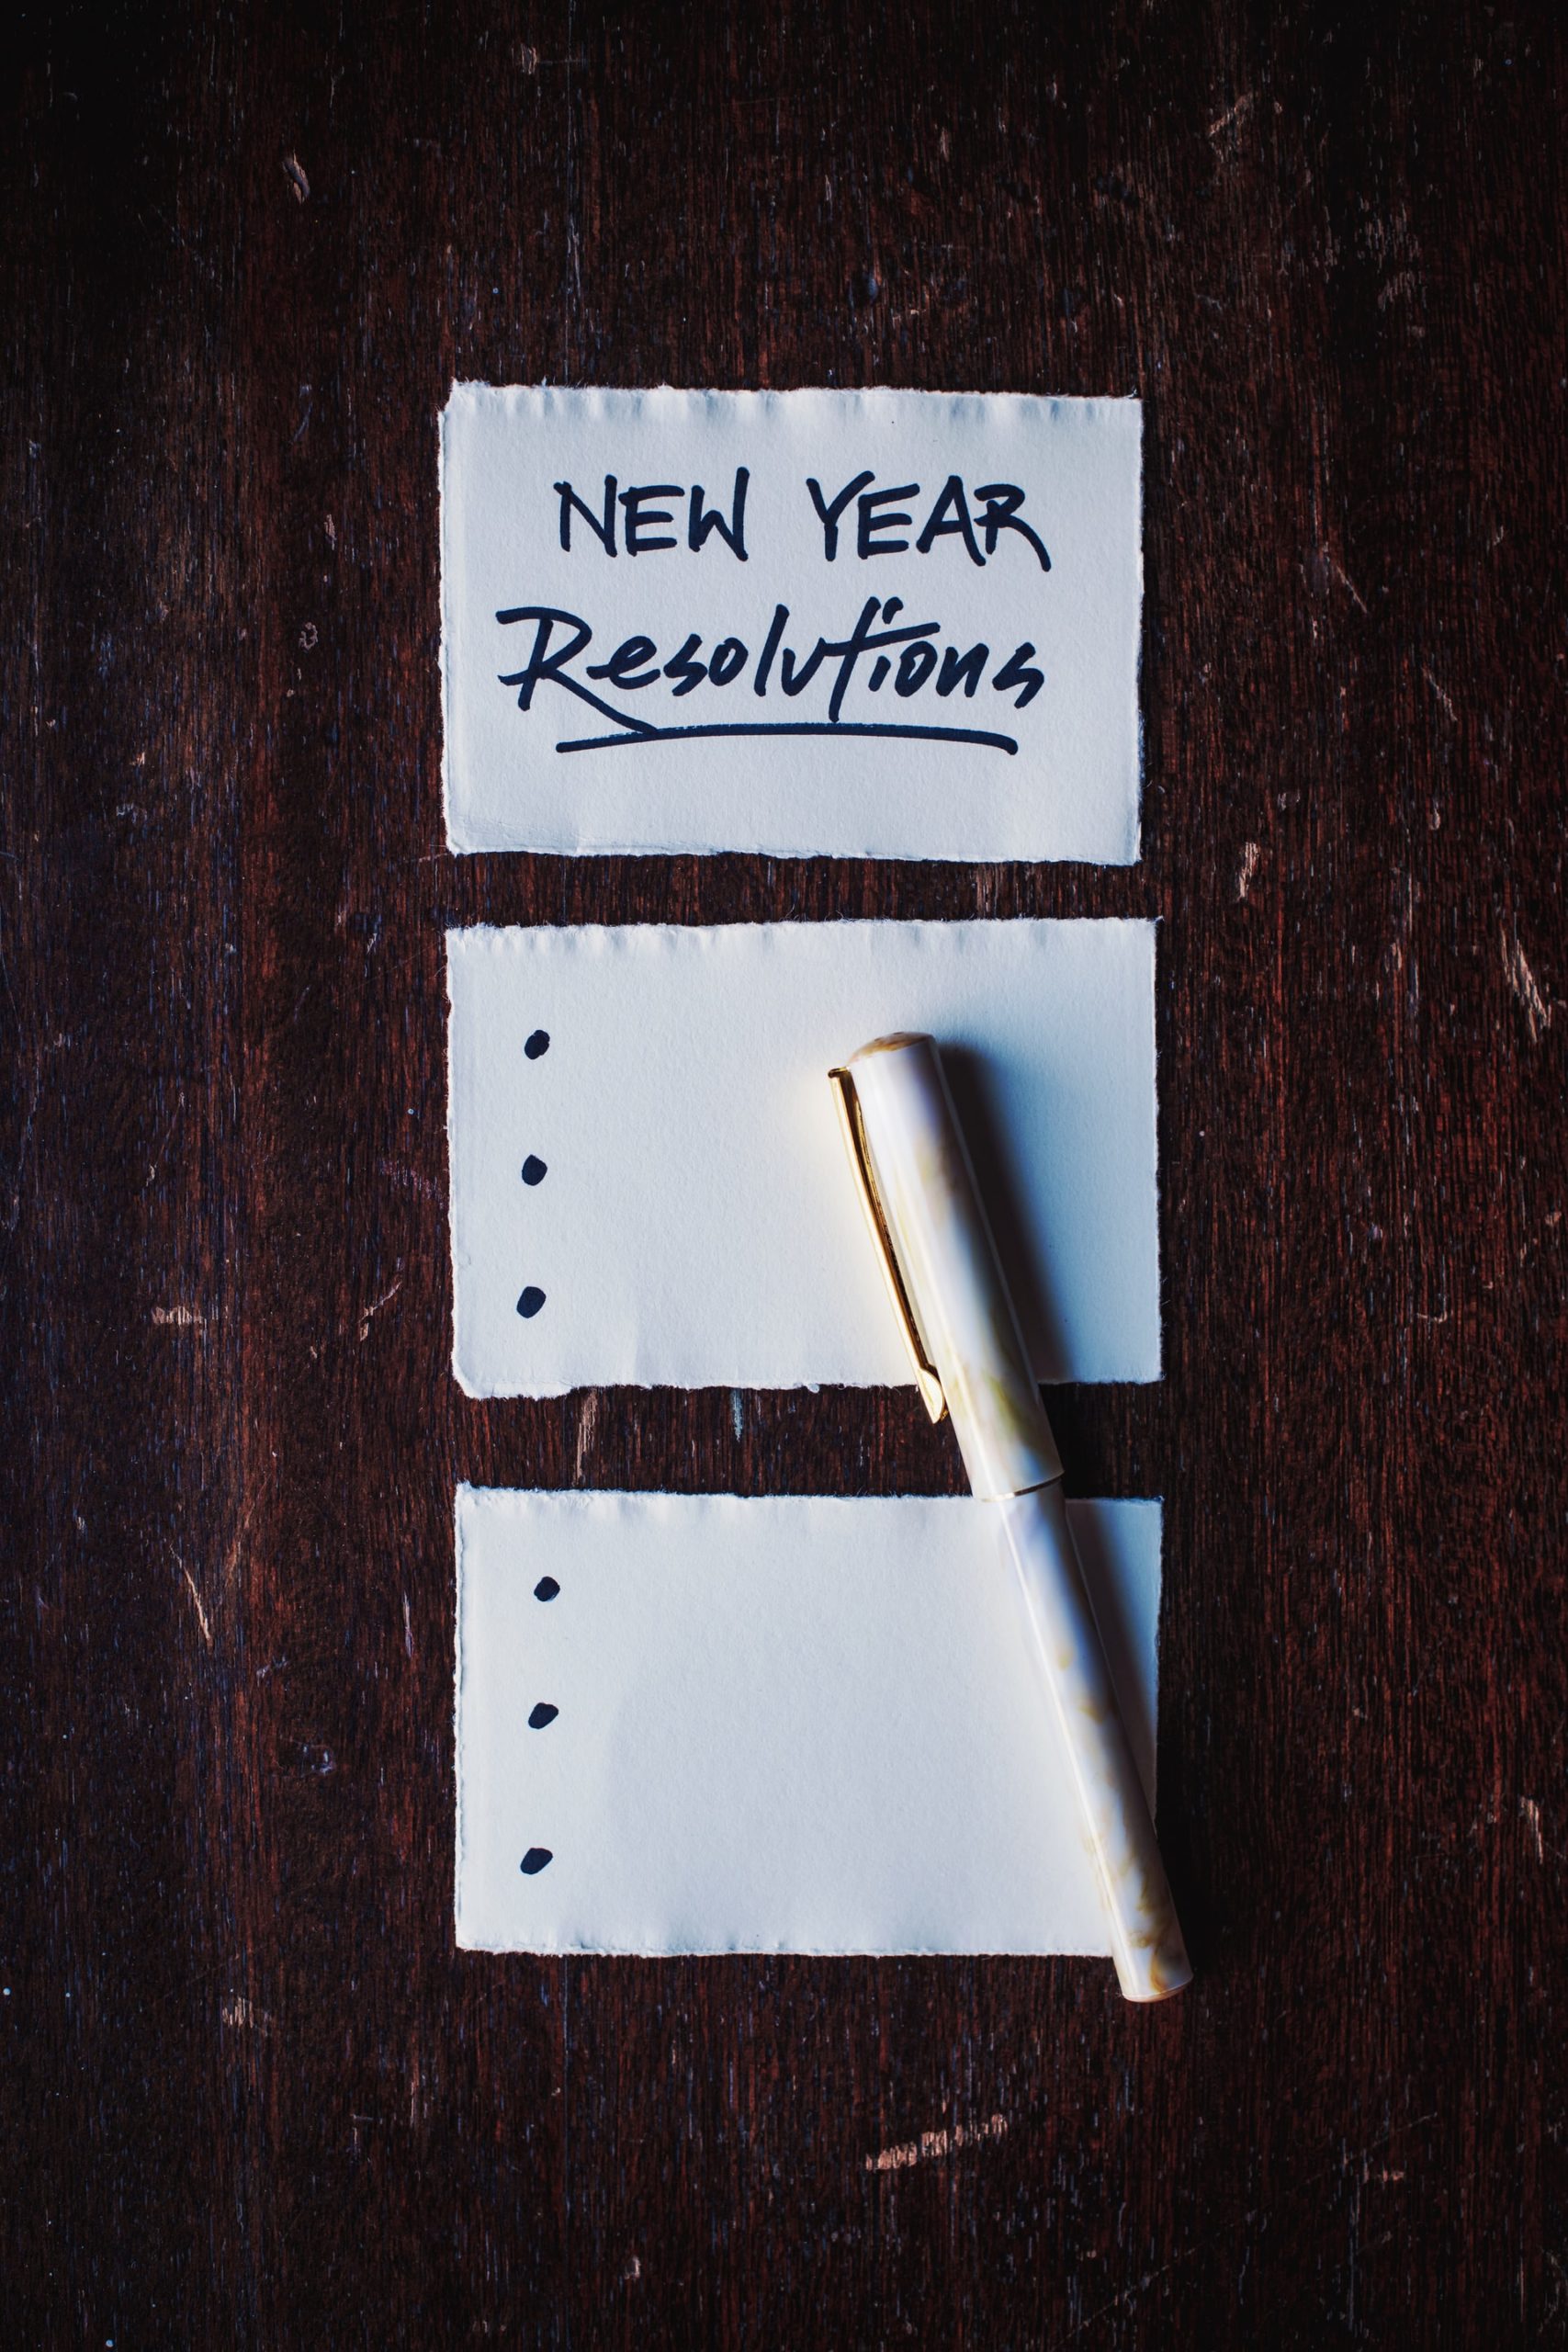 New Year Resolution Addiction Recovery